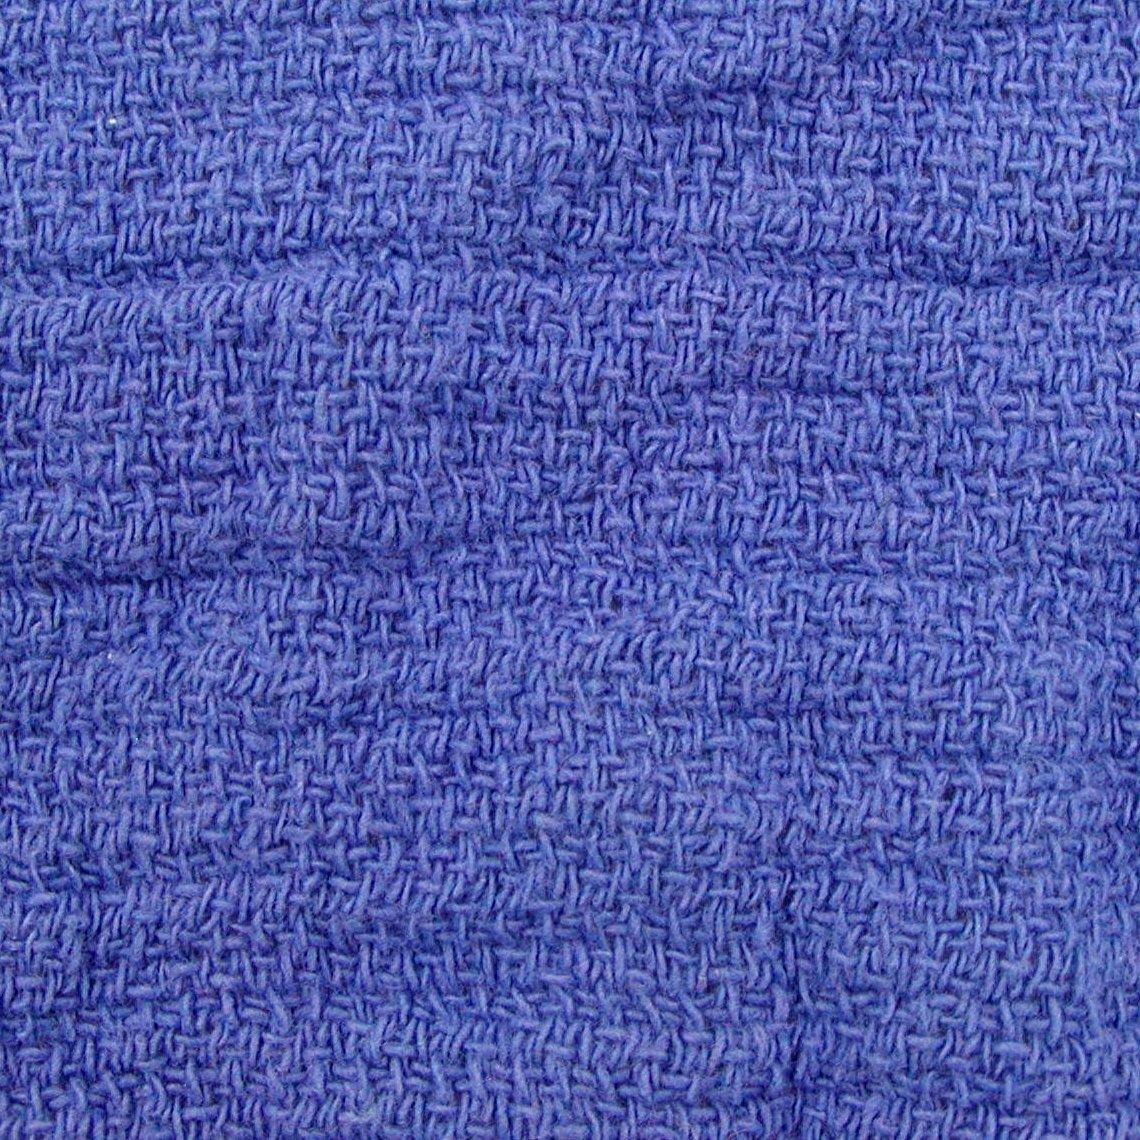 Reclaimed Huck Towels, Wholesale Prices